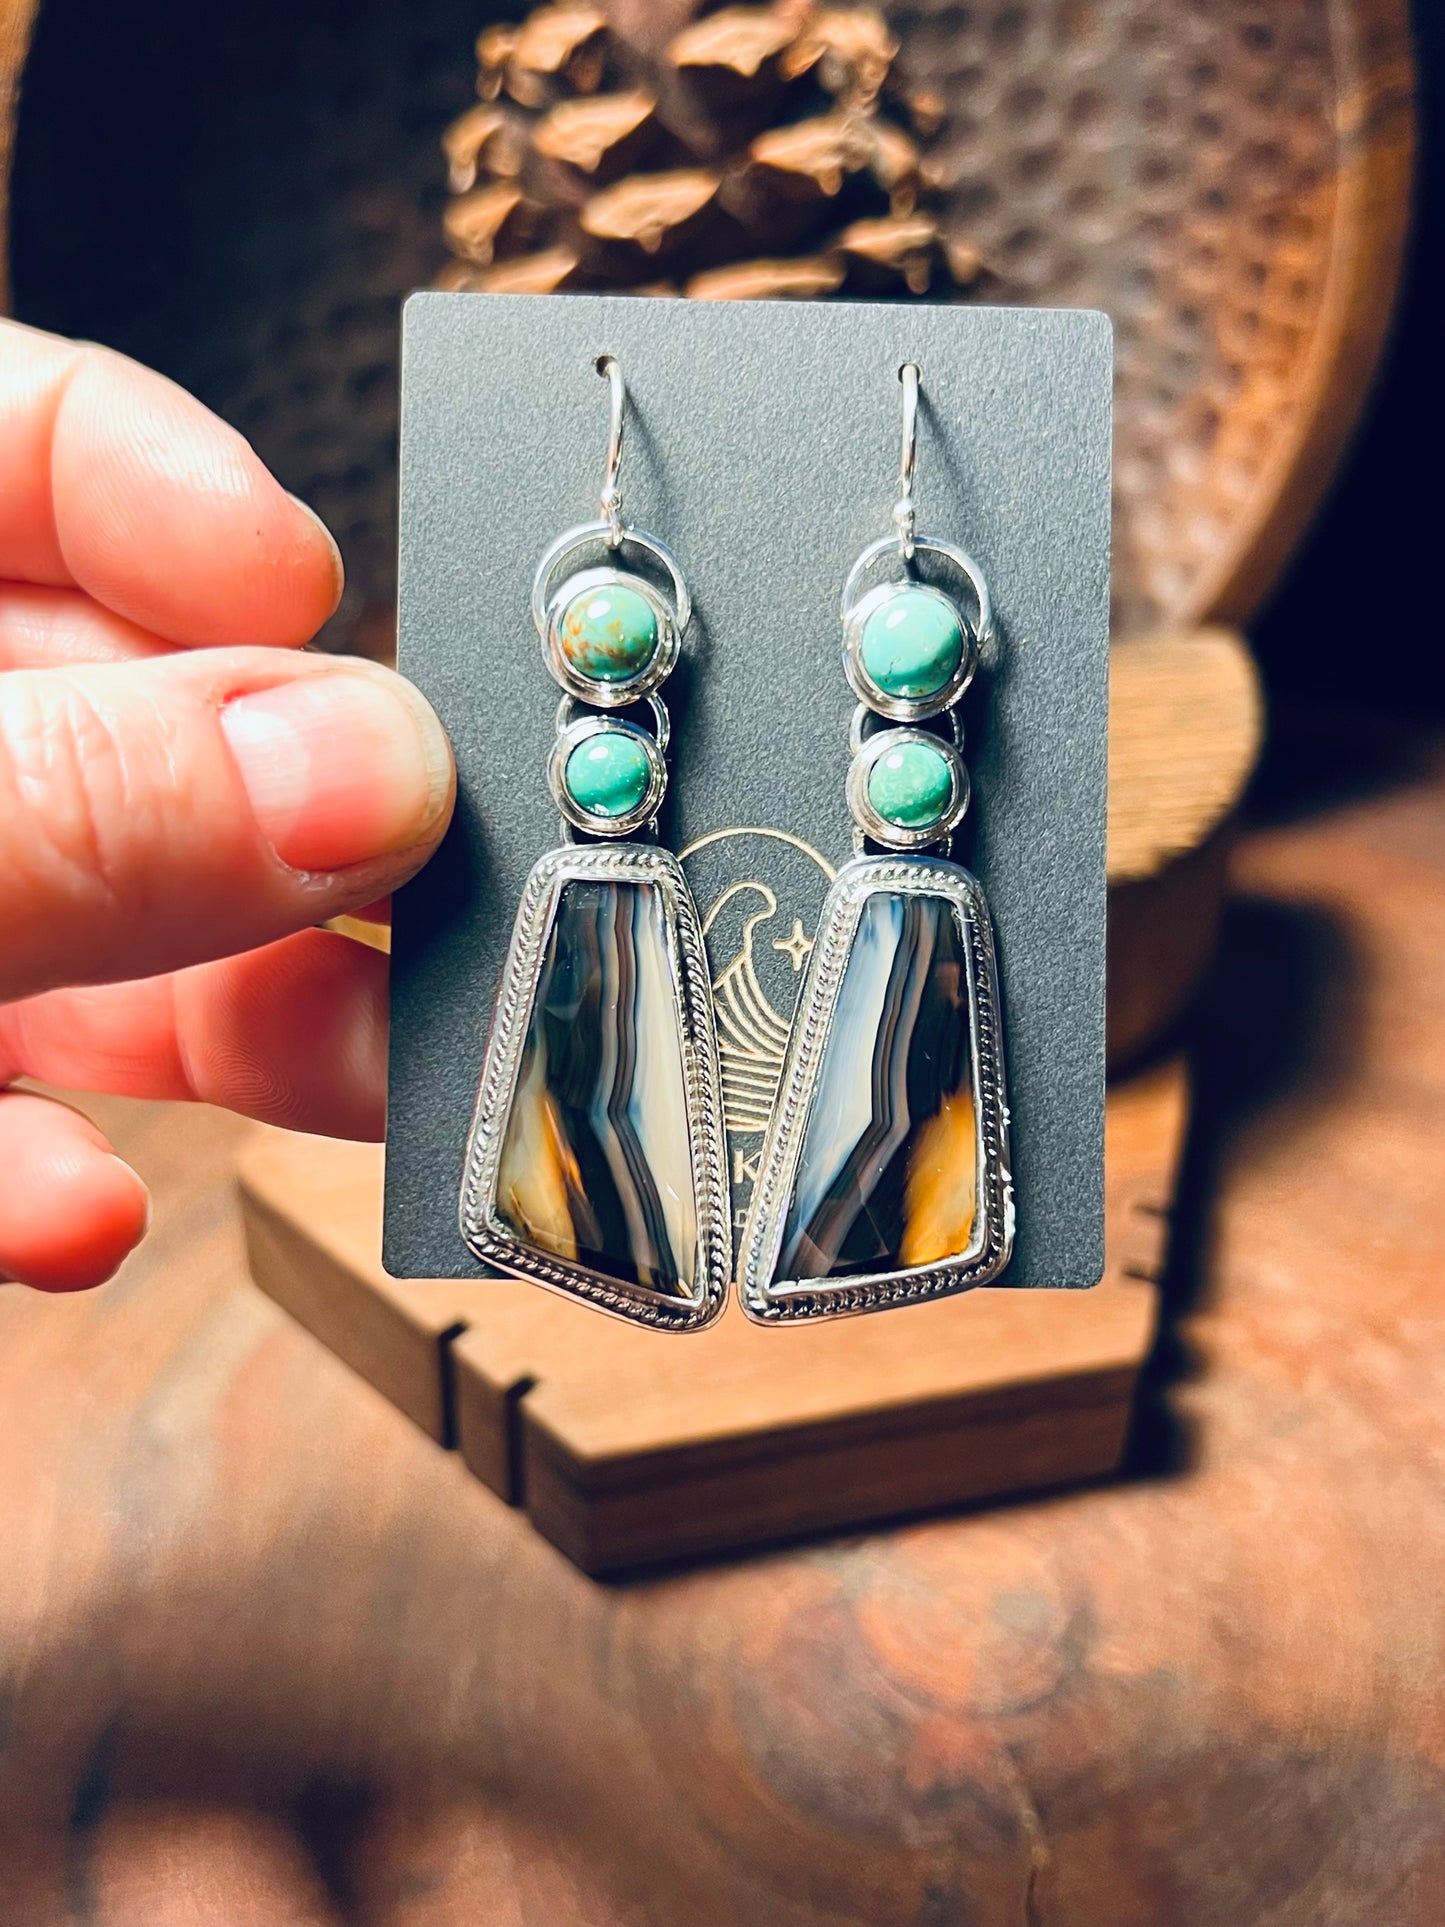 Montana Agate and Turquoise Sterling Silver Earrings